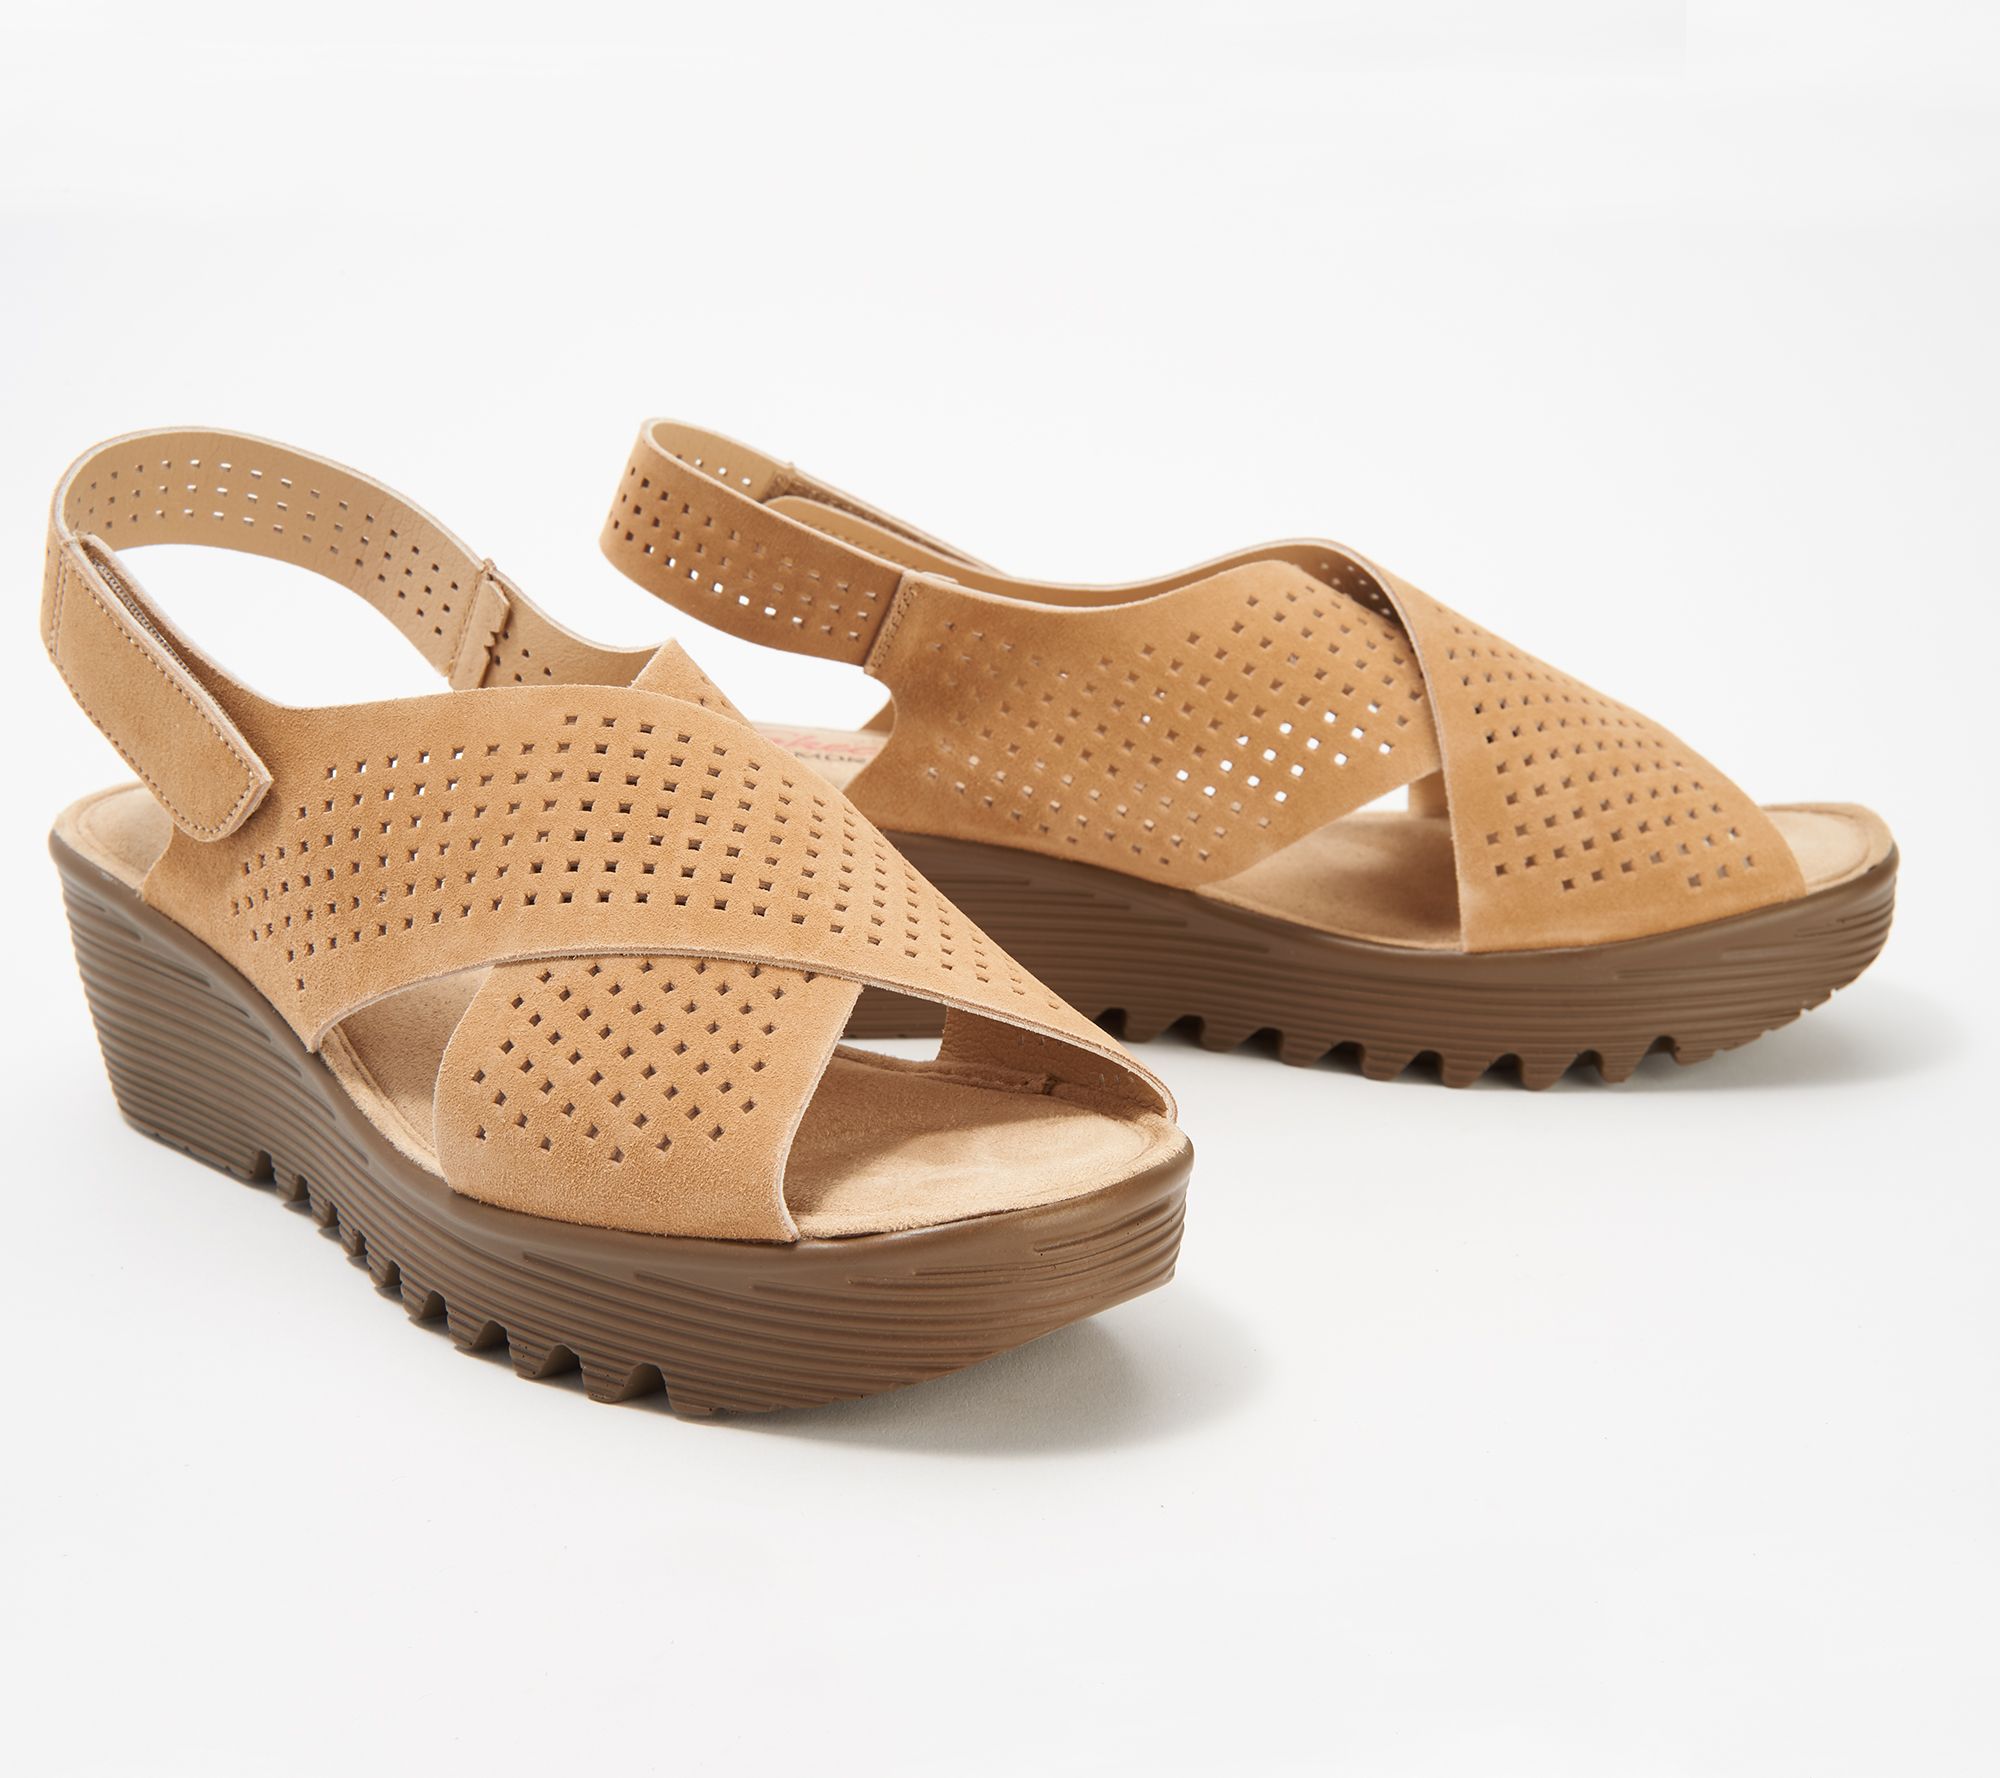 Skechers Perforated Suede Slingback 